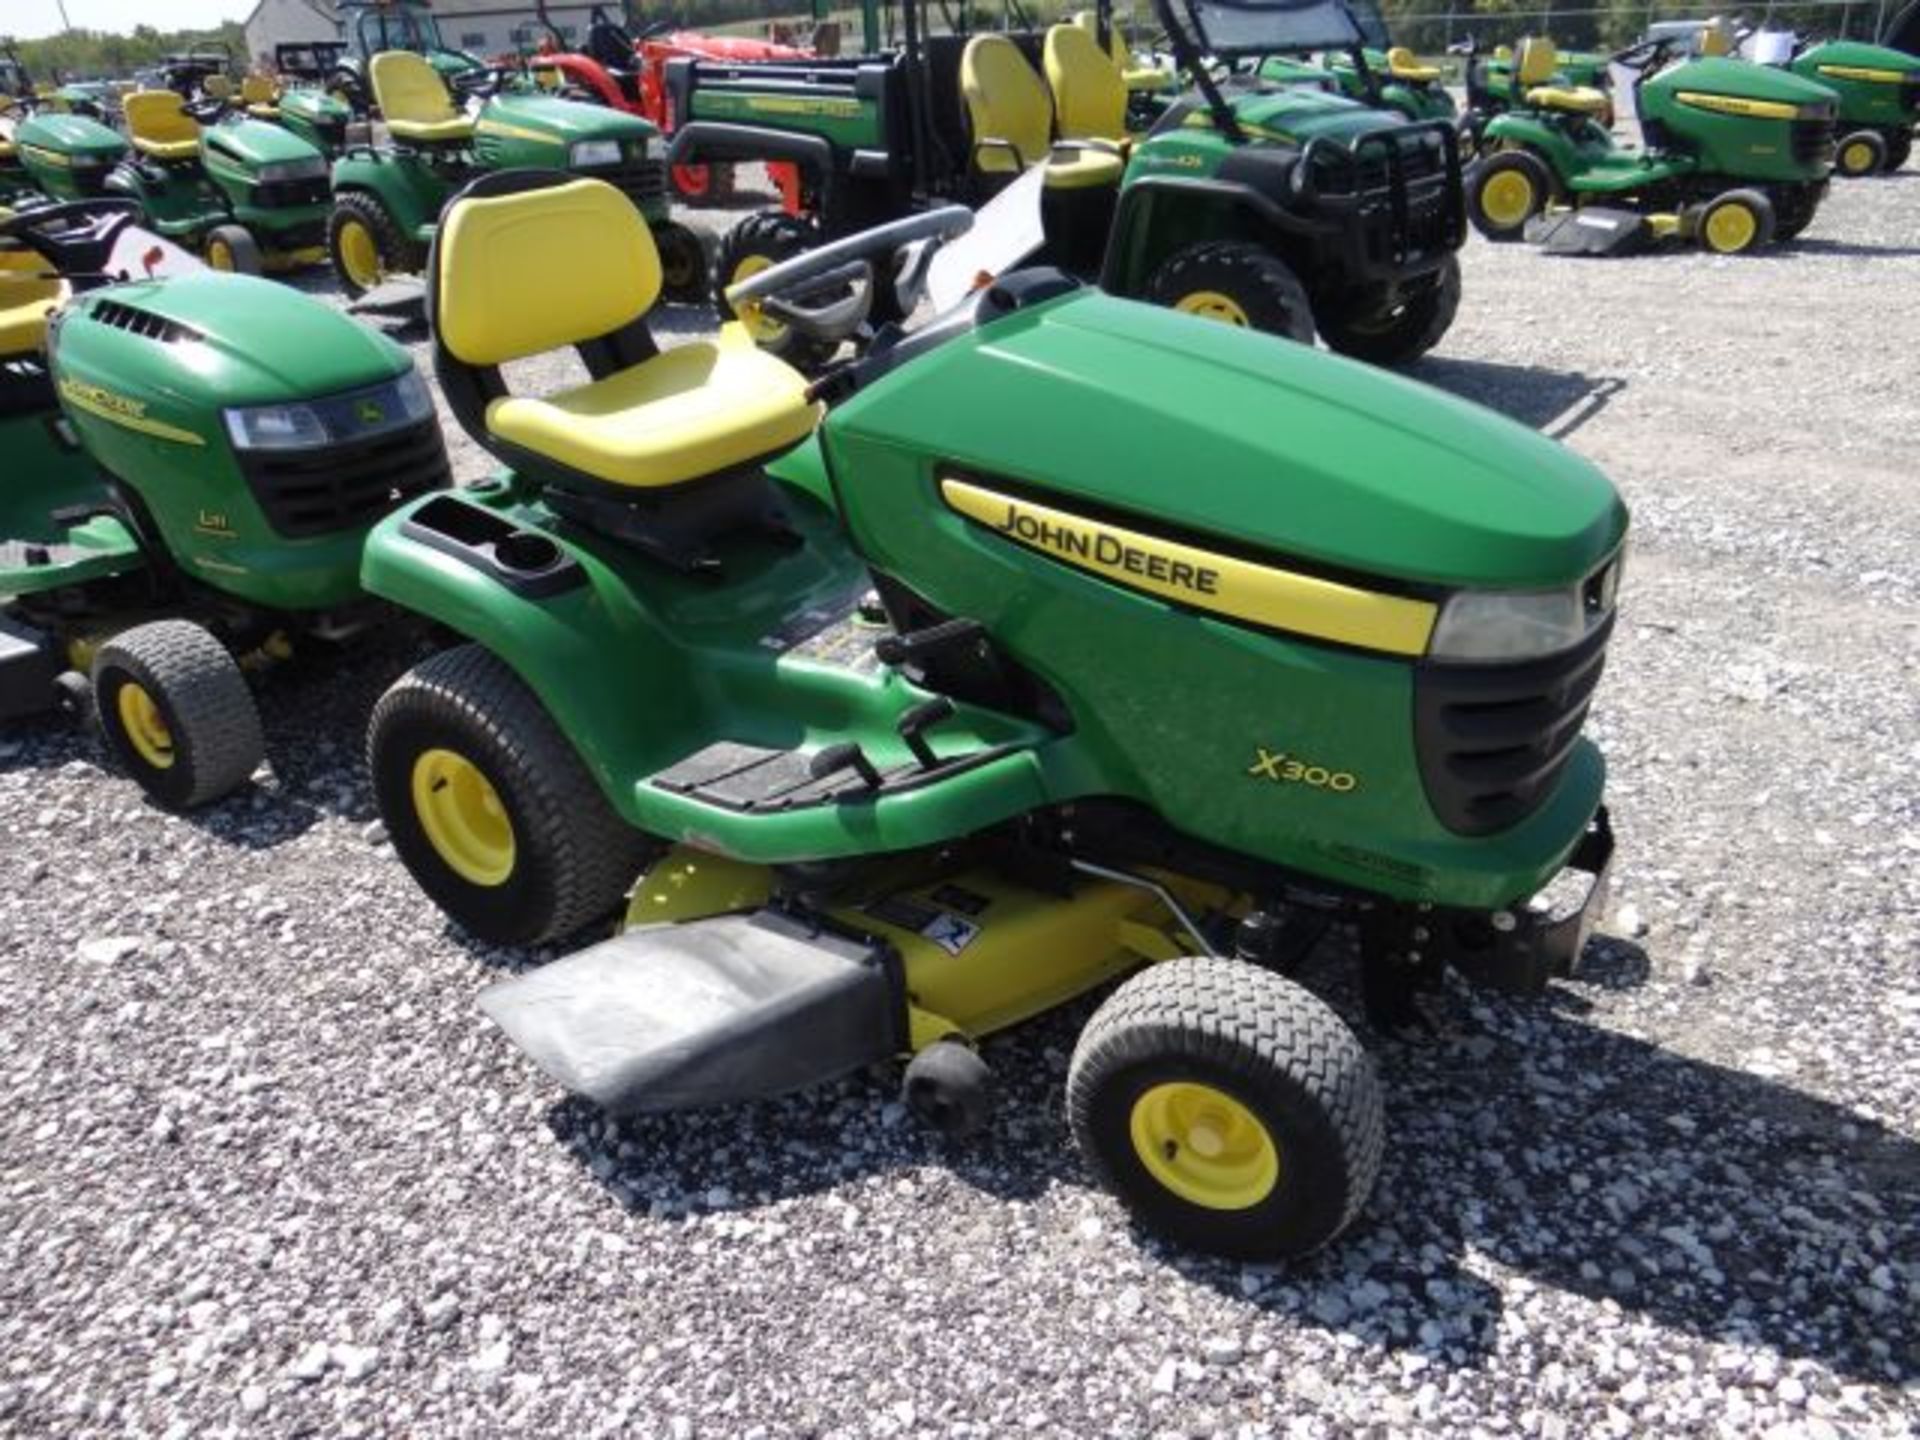 2007 JD X300 Mower 341 hrs, 17hp Kawasaki, V-Twin, Air Cooled, Hydro, w/ 42" Deck and 44" Front - Image 3 of 3